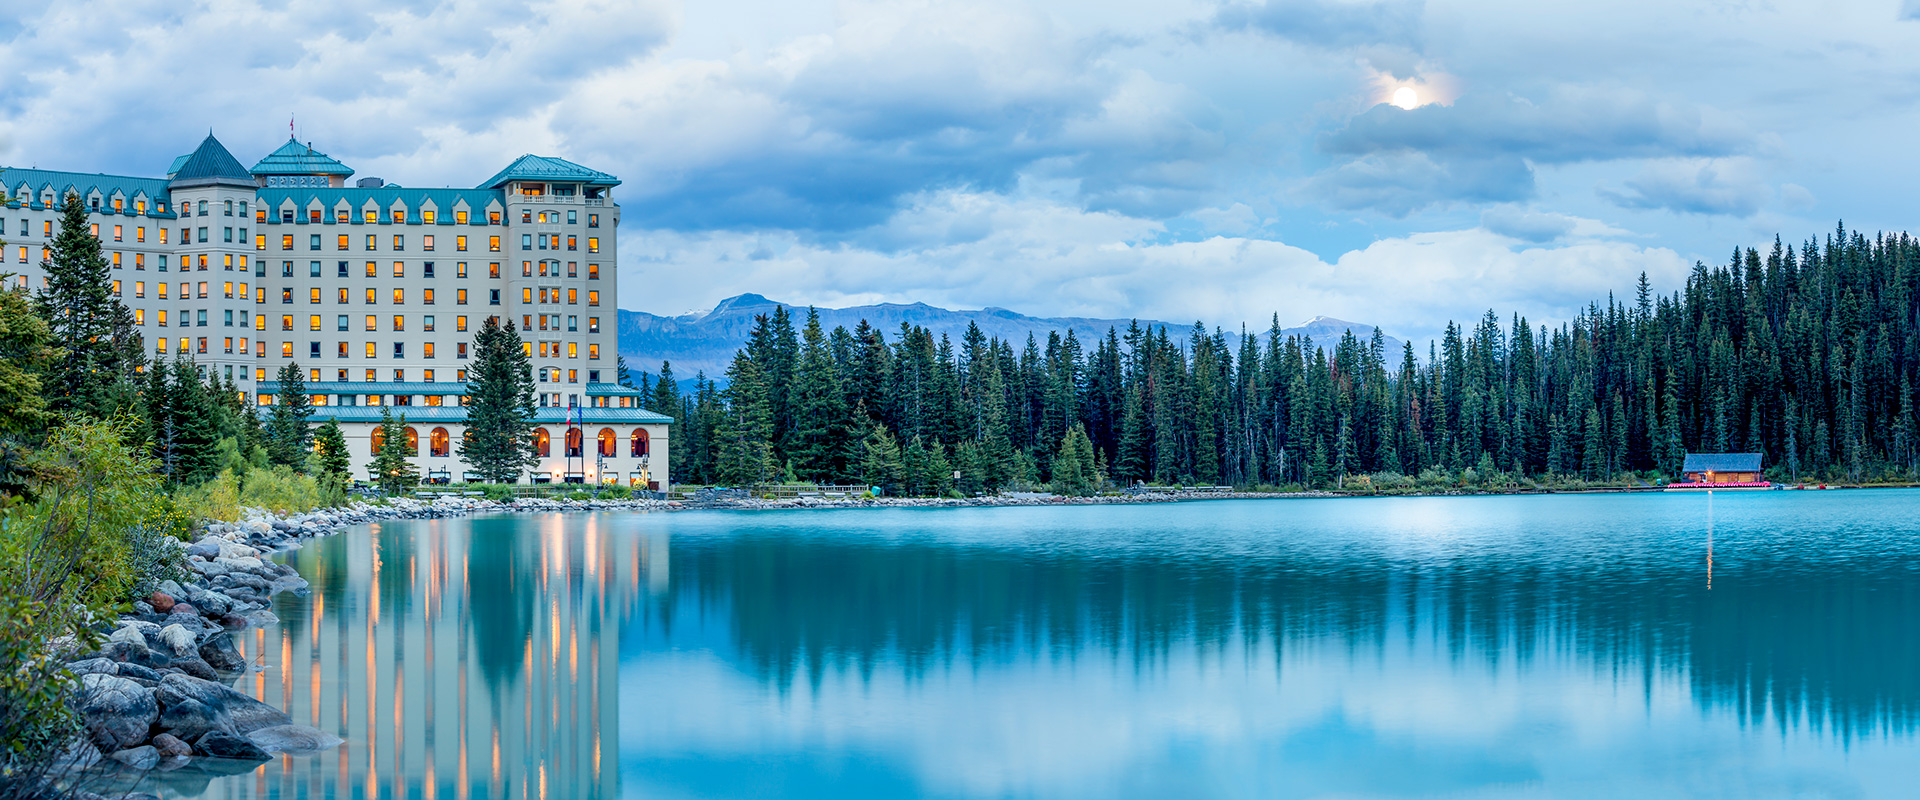 Fairmont Lake Louise hotel with reflection in lake at dusk